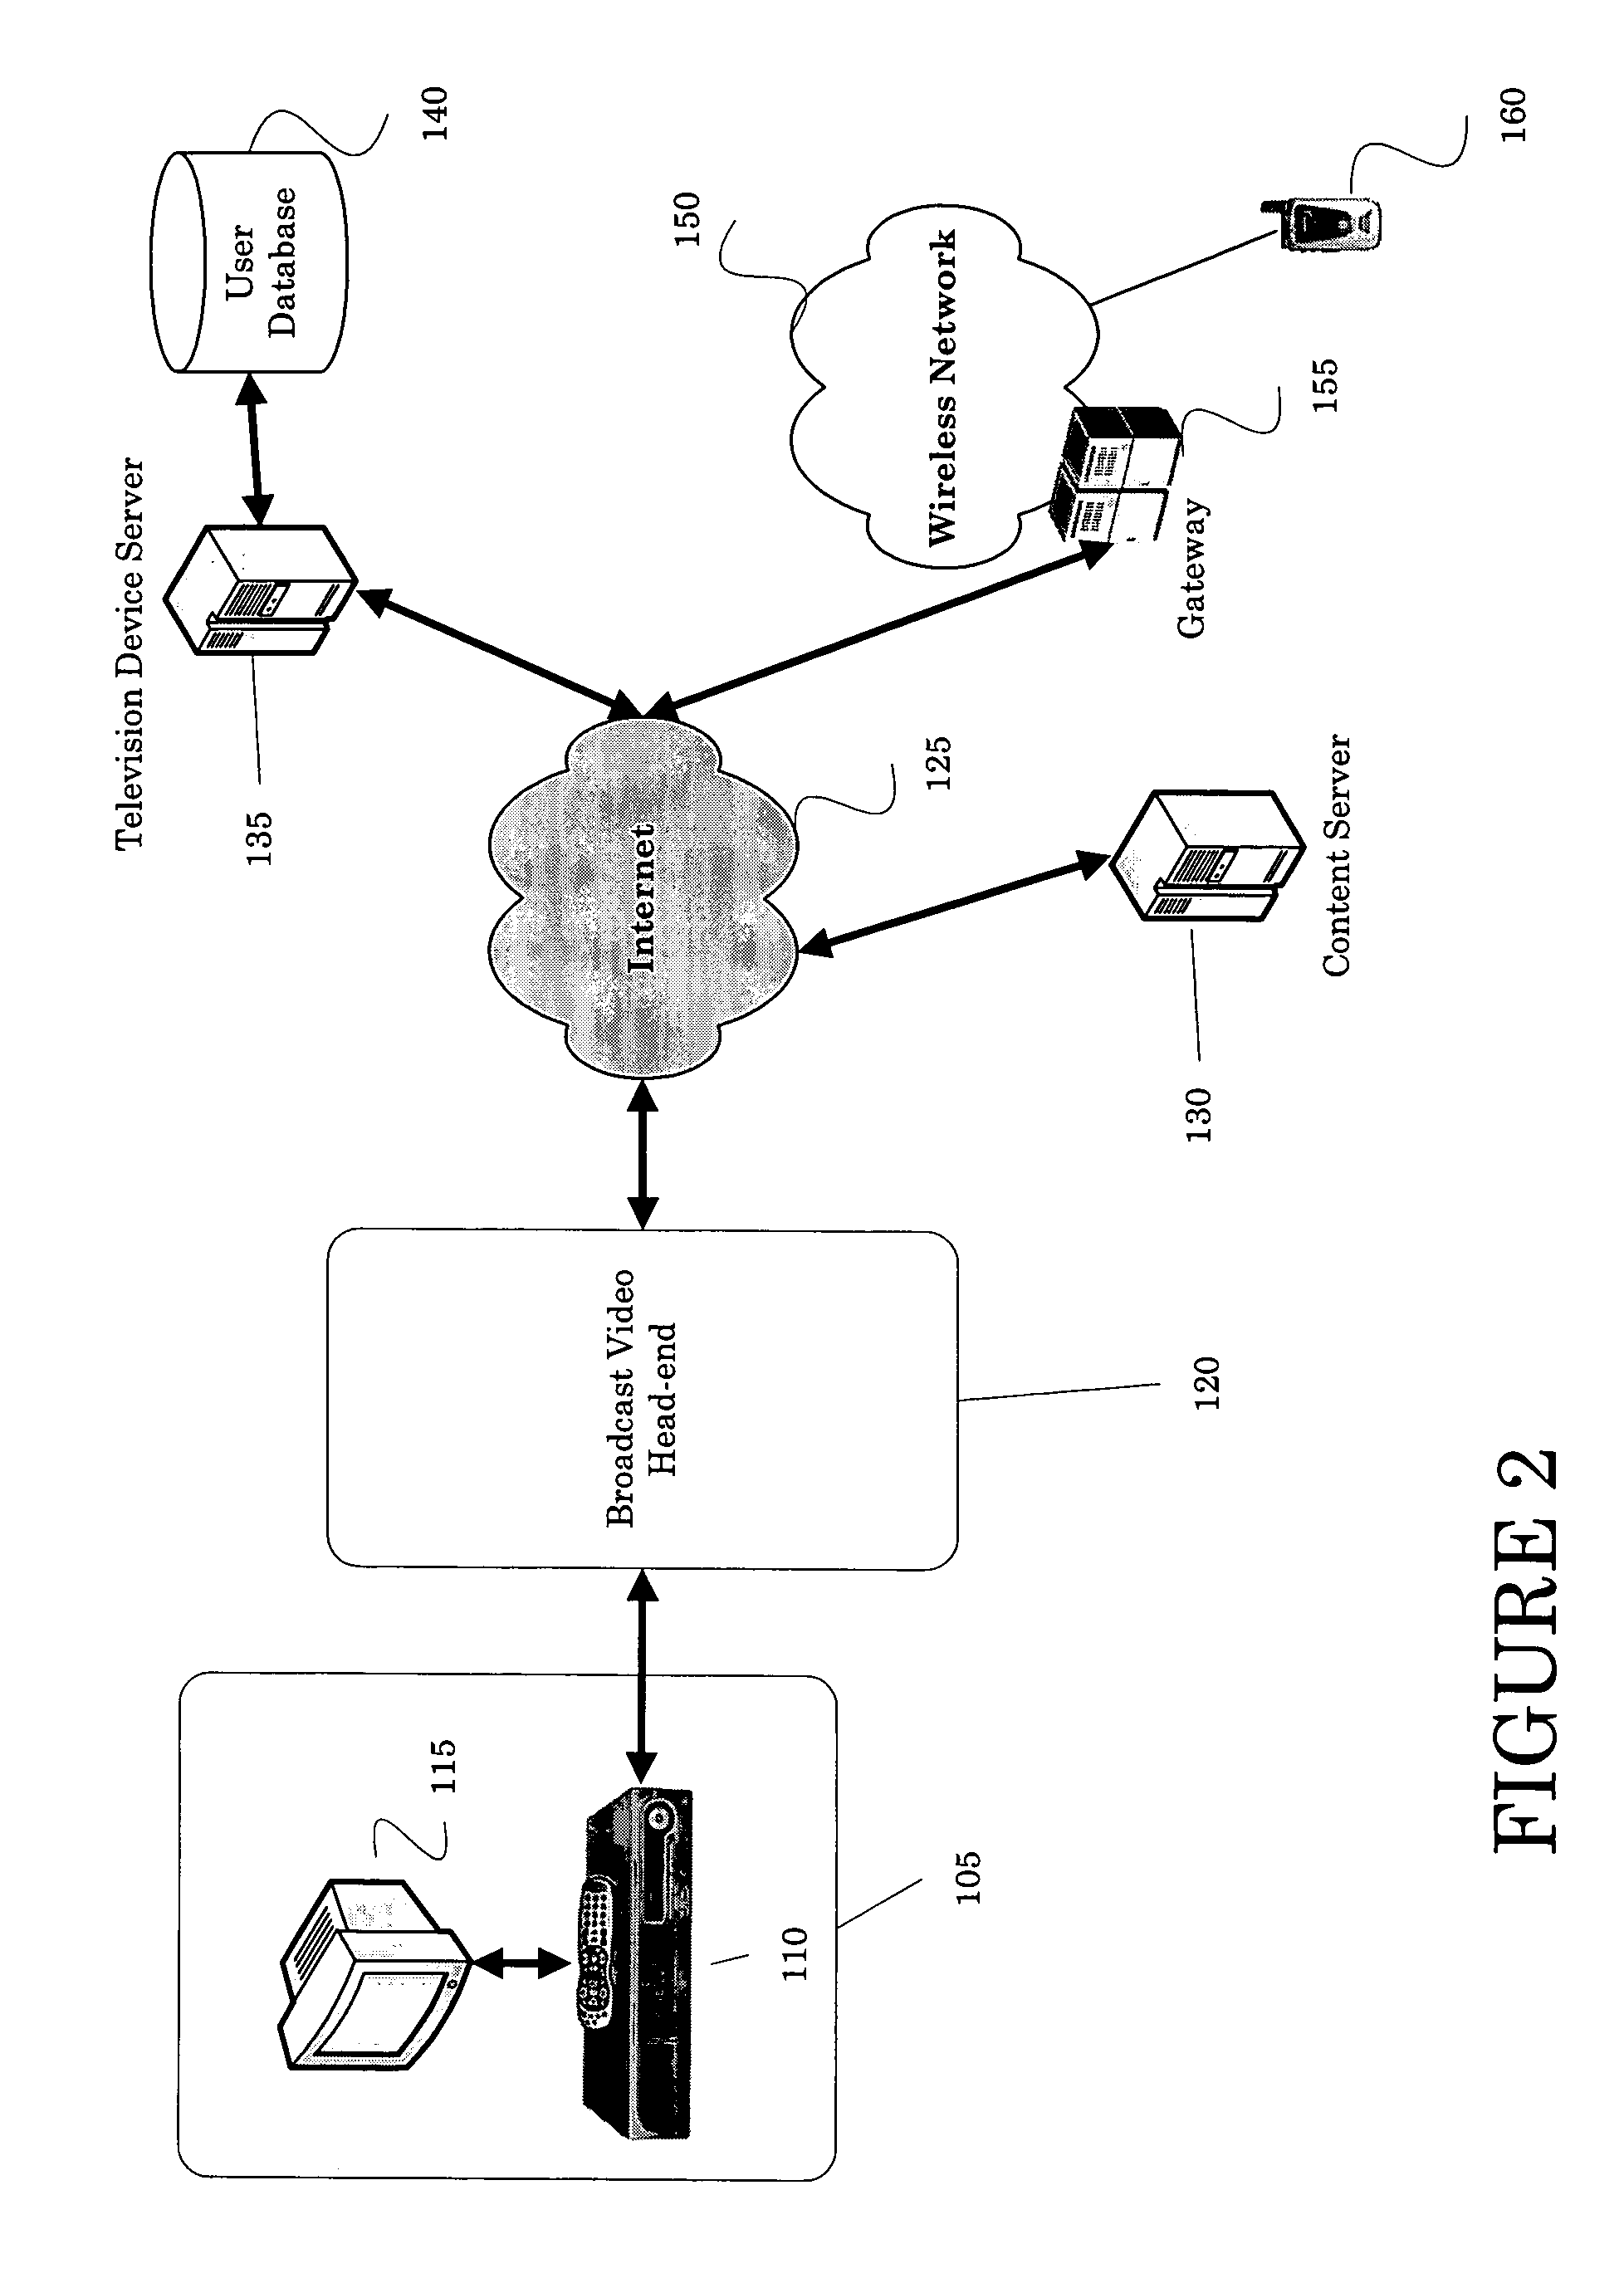 Systems and methods for scheduling the recording of audio and/or visual content